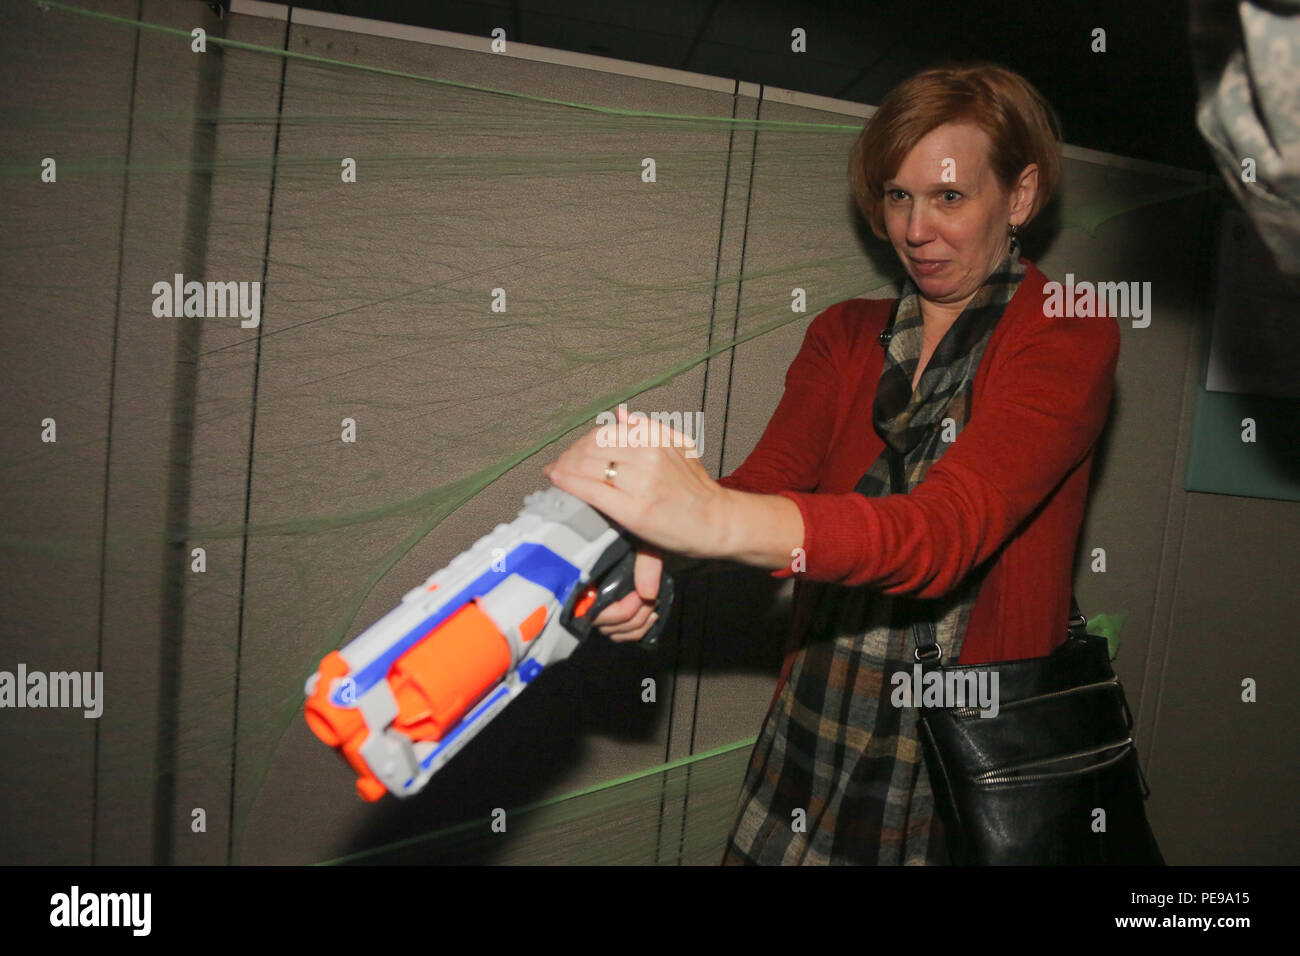 Kelly Paul, spouse of Sgt. 1st Class Christophe Paul, assigned to the 55th Signal Company (COMCAM), uses a Nerf gun to shoot at Zombies during the Company annual Halloween party, Fort George G. Meade, Oct. 29, 2015. The gathering was organized by the Family Readiness Group and is designed to bring Soldiers and their family together to celebrate Halloween and also to build esprit de corp. (U.S. Army photo by Sgt. 1st Class Christophe D. Paul/Released) Stock Photo